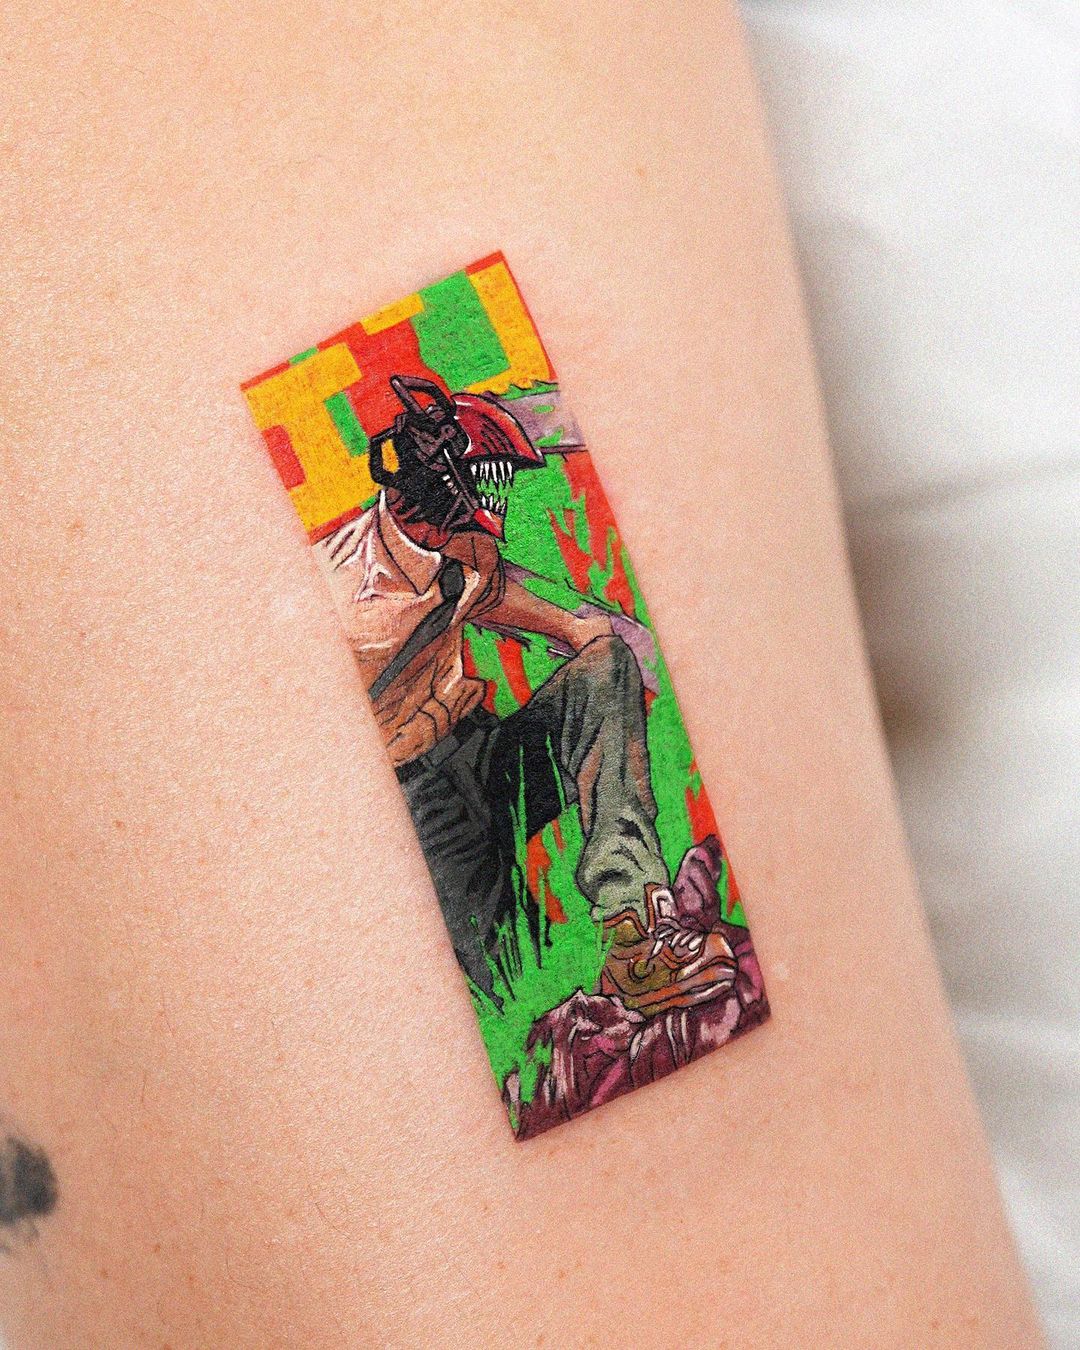 A Vivid Dbz Tattoo With Piccolo In Action